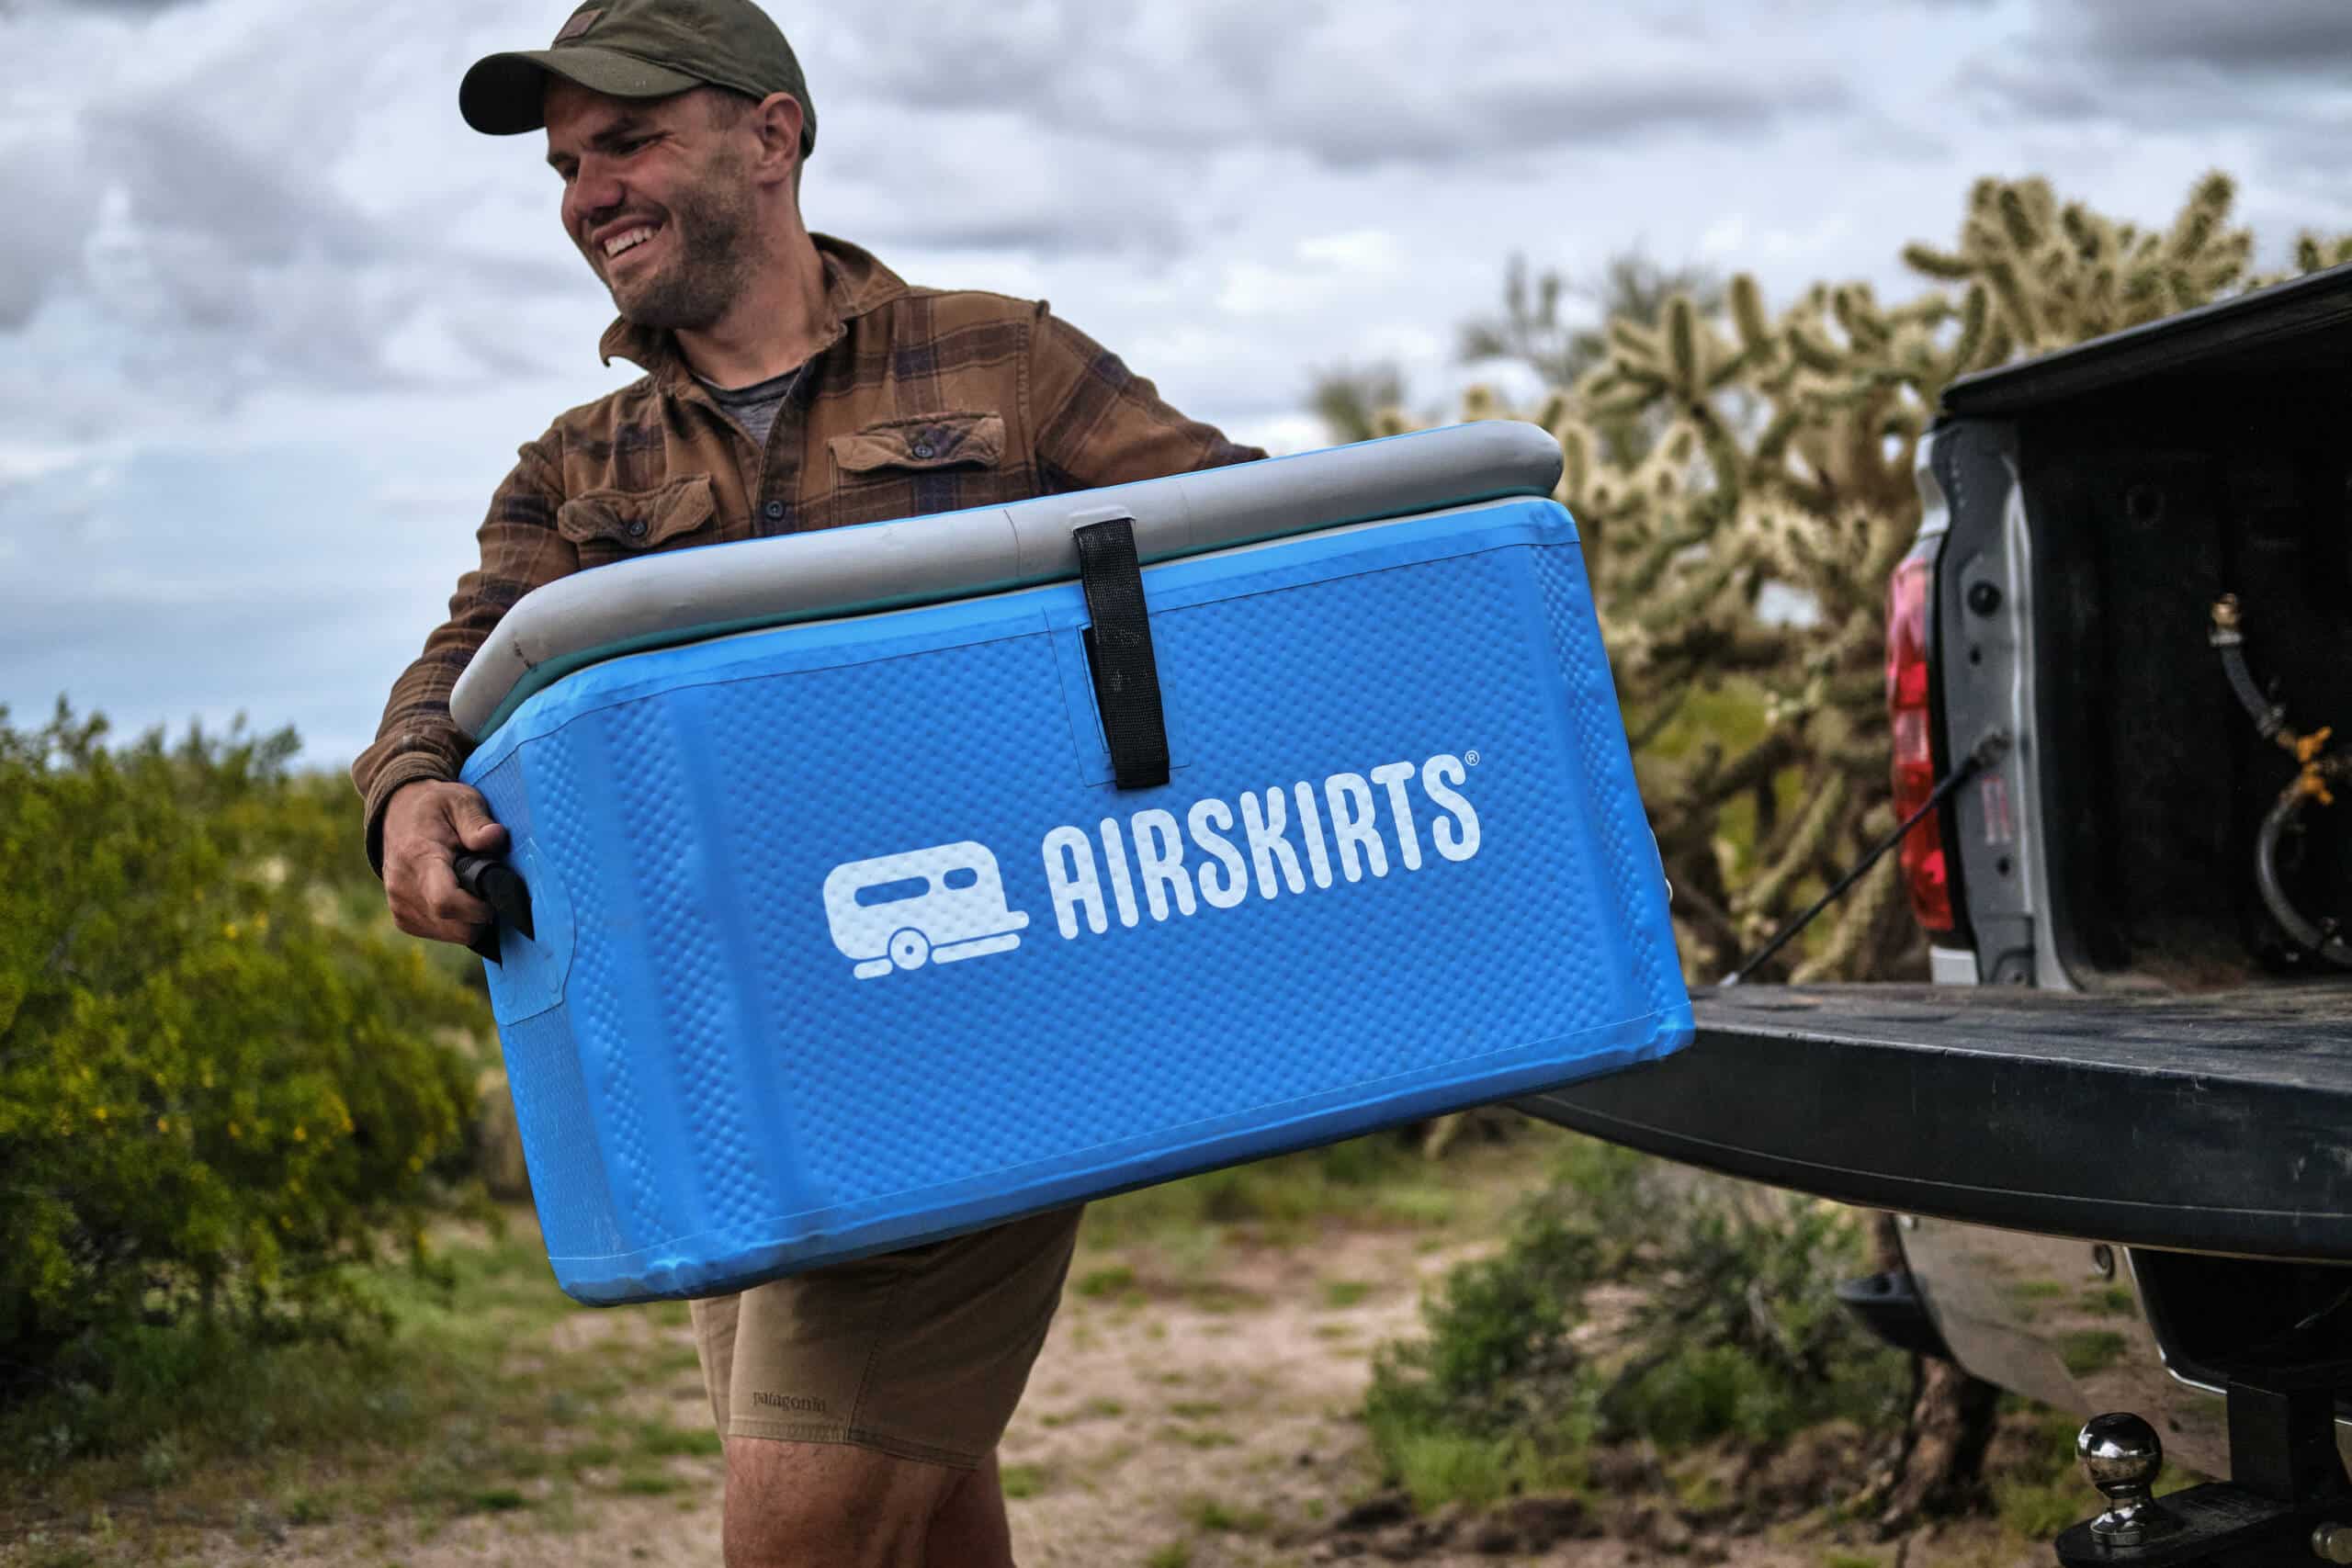 Man carries inflatable cooler